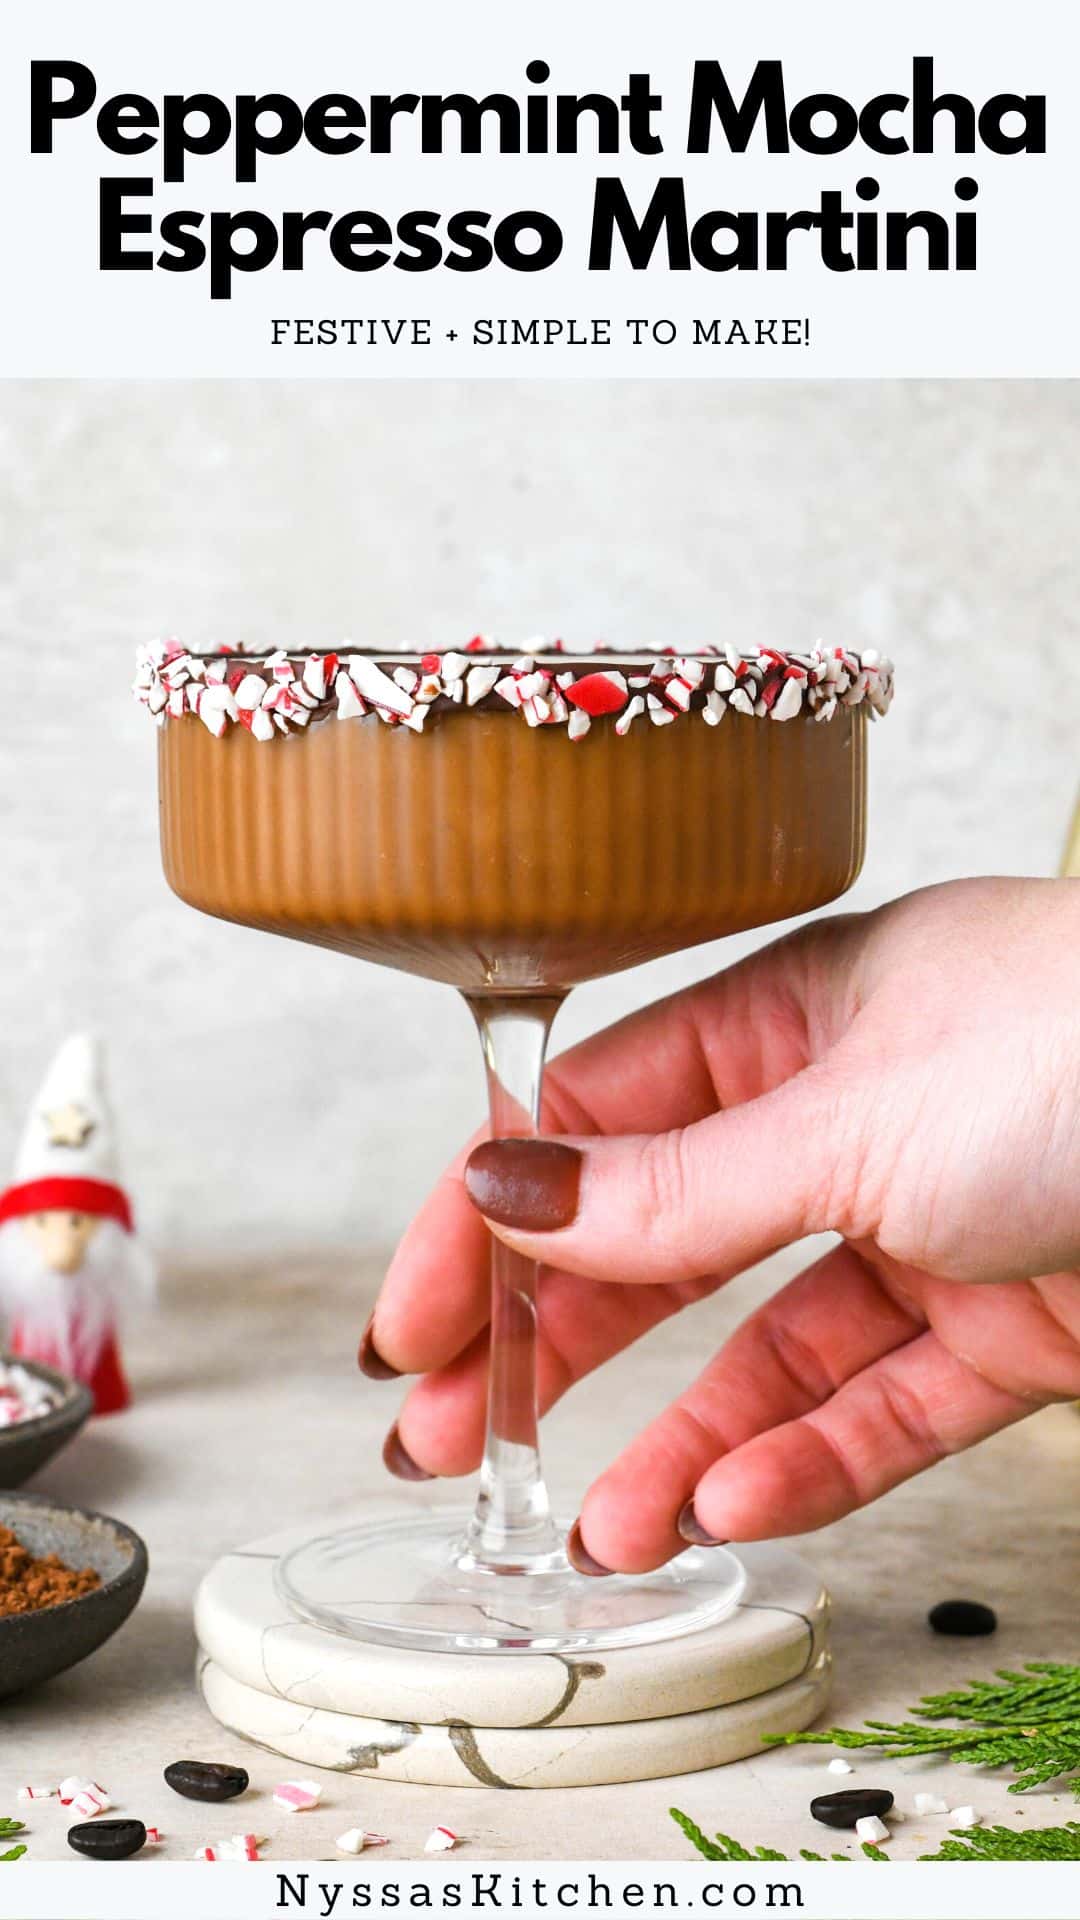 A peppermint mocha espresso martini is an easy (yet fancy!) make at home cocktail that's just perfect for the holiday season. Made with pantry staples that you likely already have on hand (no need to run to the store for any special ingredients), and simple enough that it can be whipped up in just a few minutes. Delightfully creamy, and laced with notes of chocolate and peppermint. A real treat of a drink to cozy up with throughout the winter season!